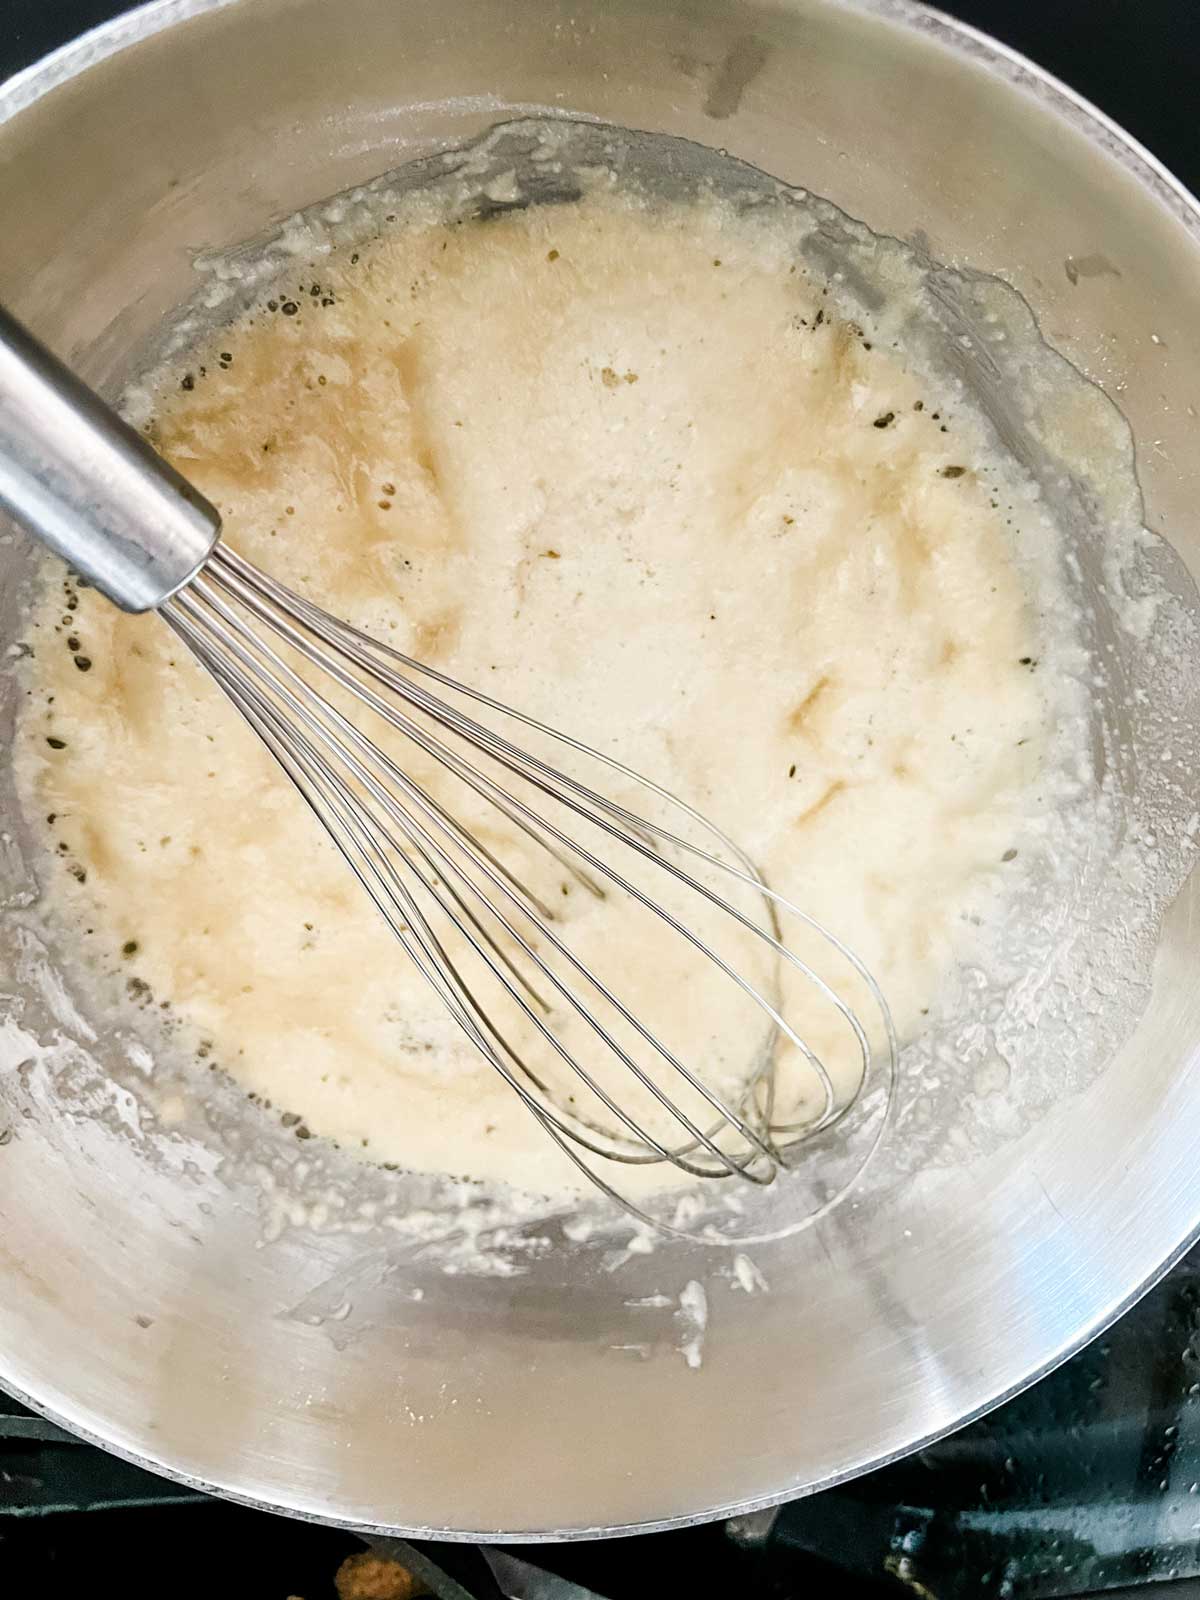 A roux forming in a saucepan.